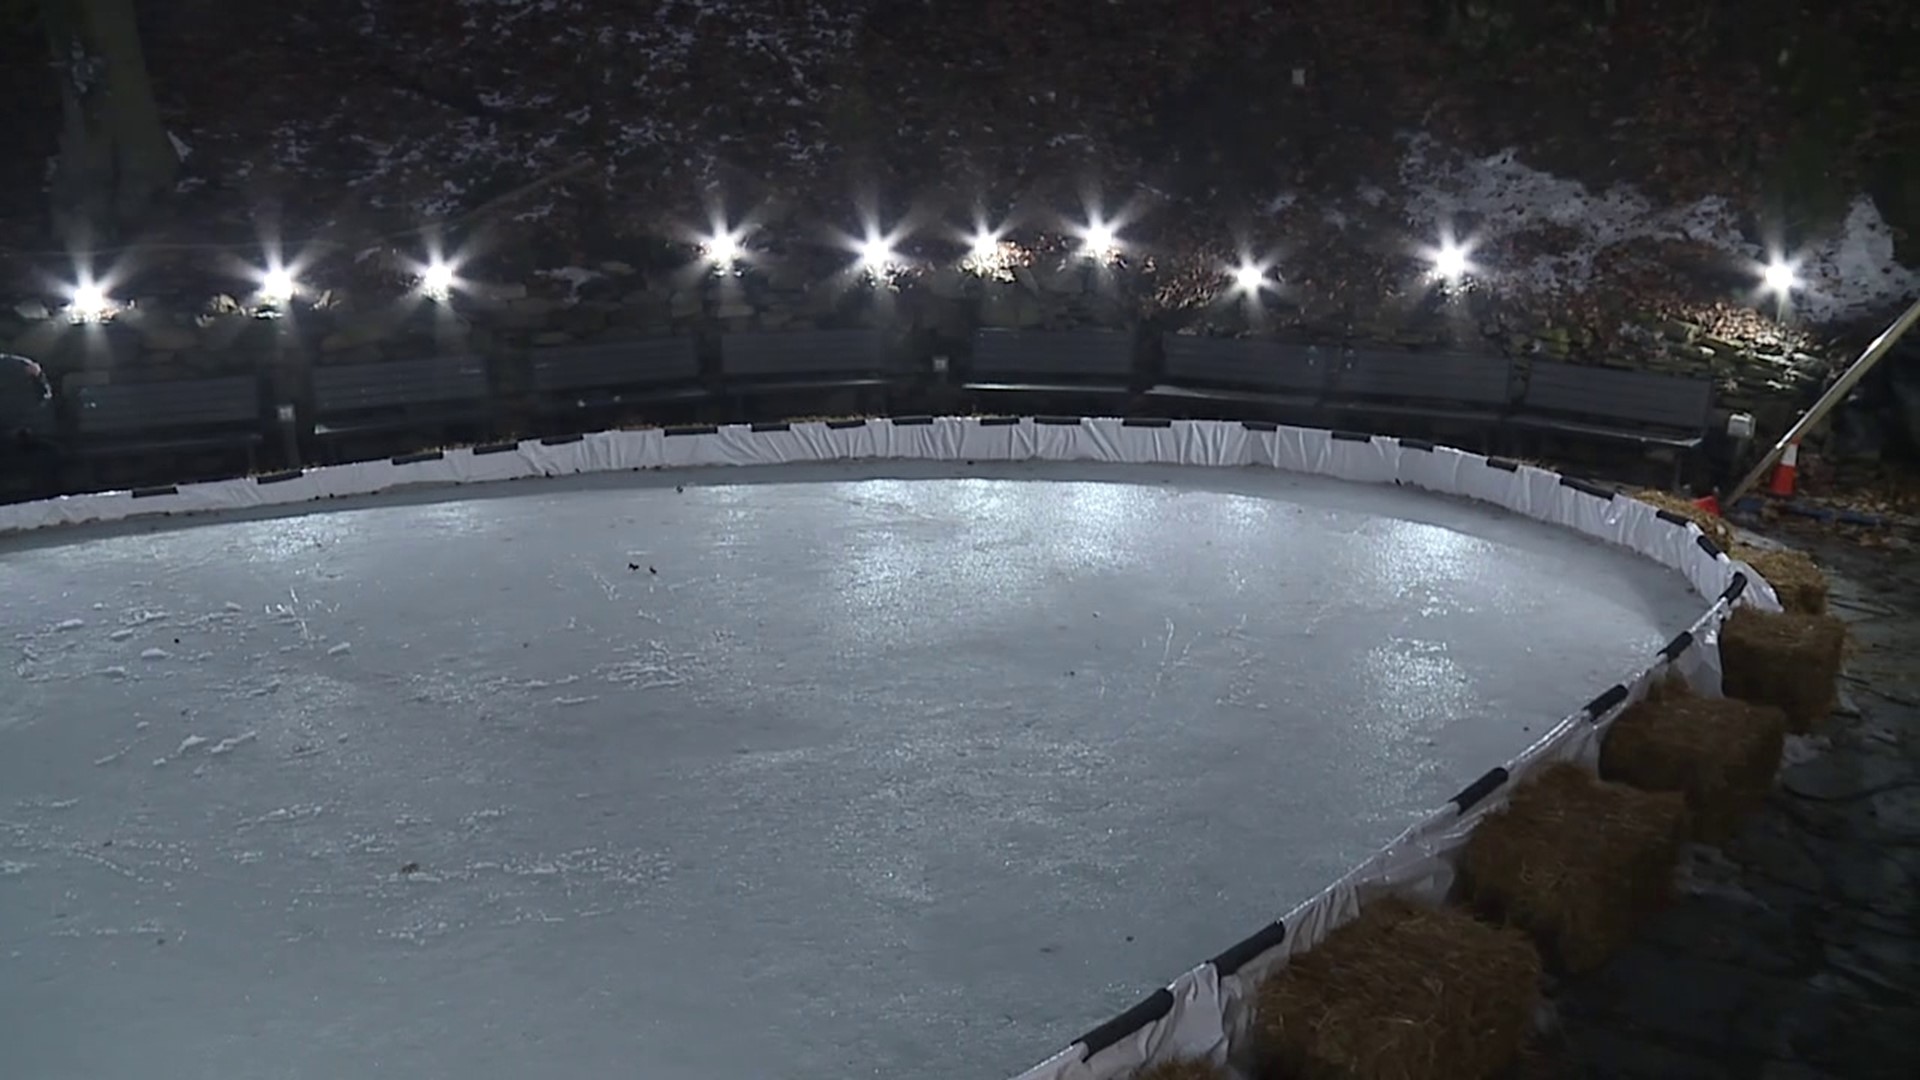 A Pottsville brewery has opened an ice-skating rink and is now inviting even first-timers, like Newswatch 16’s Marshall Keely, for a trip around the ice.